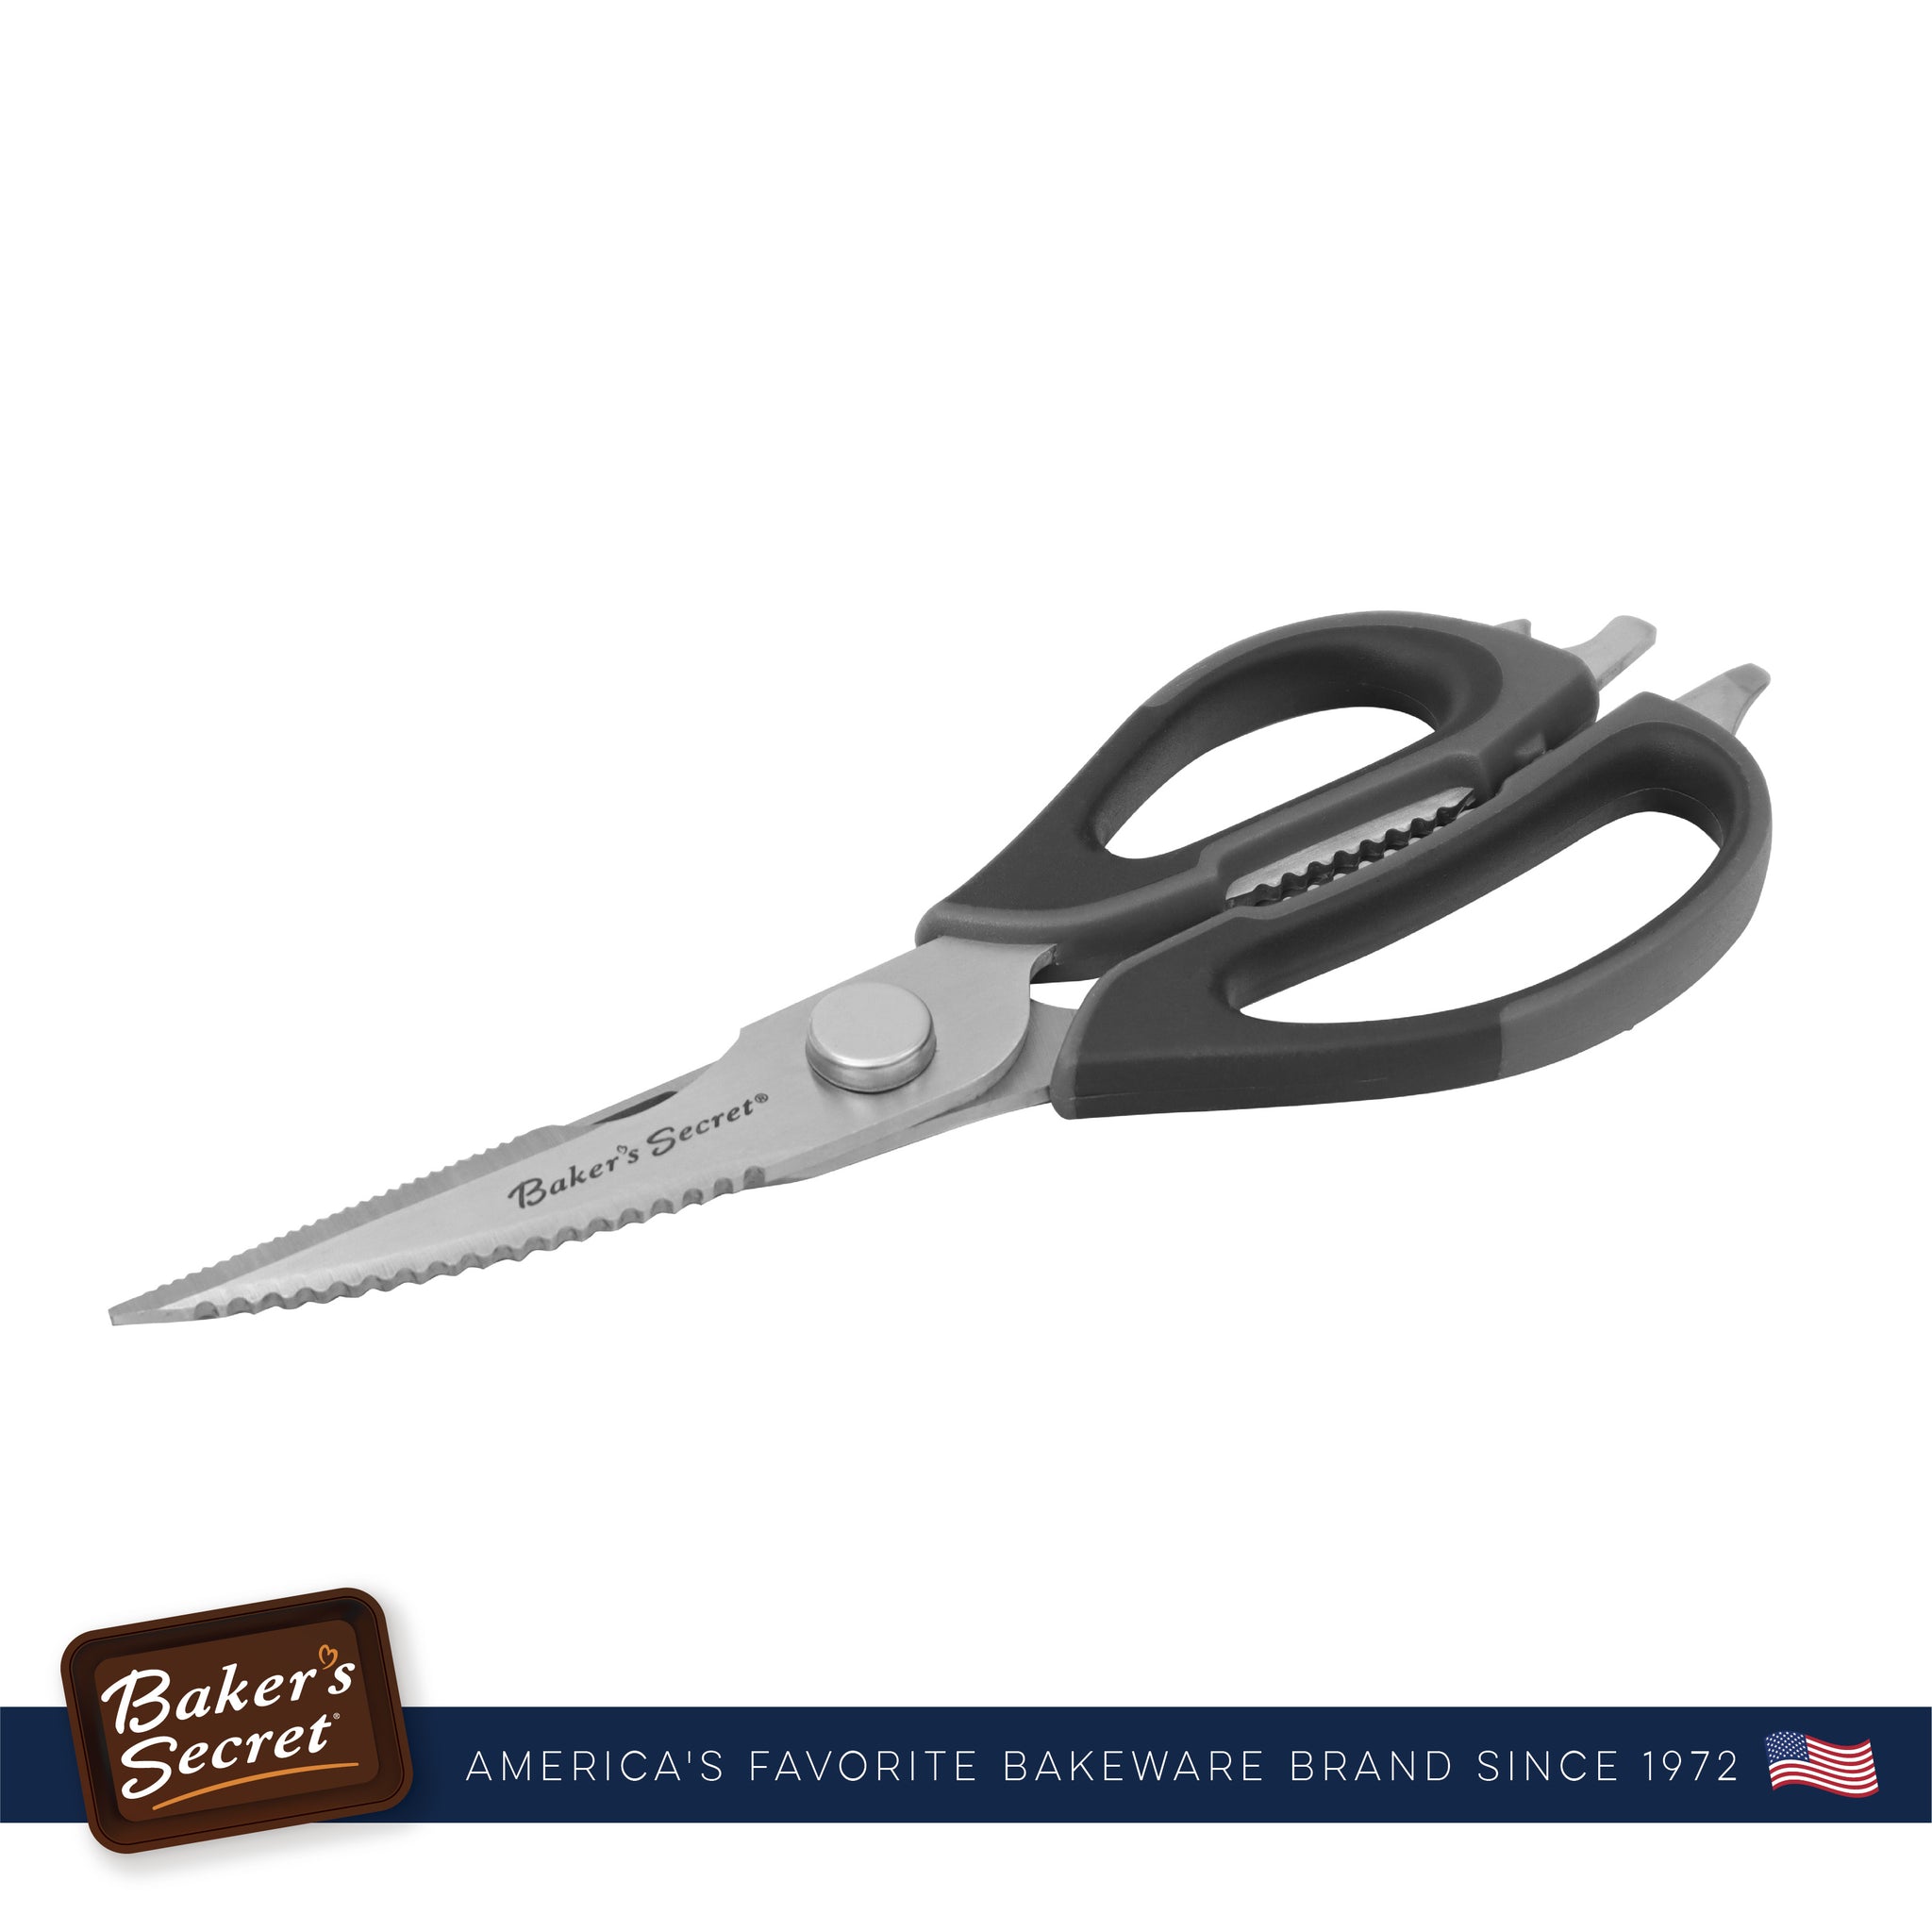 Good Old Values Kitchen Scissors 8.5 Inches Stainless Steel